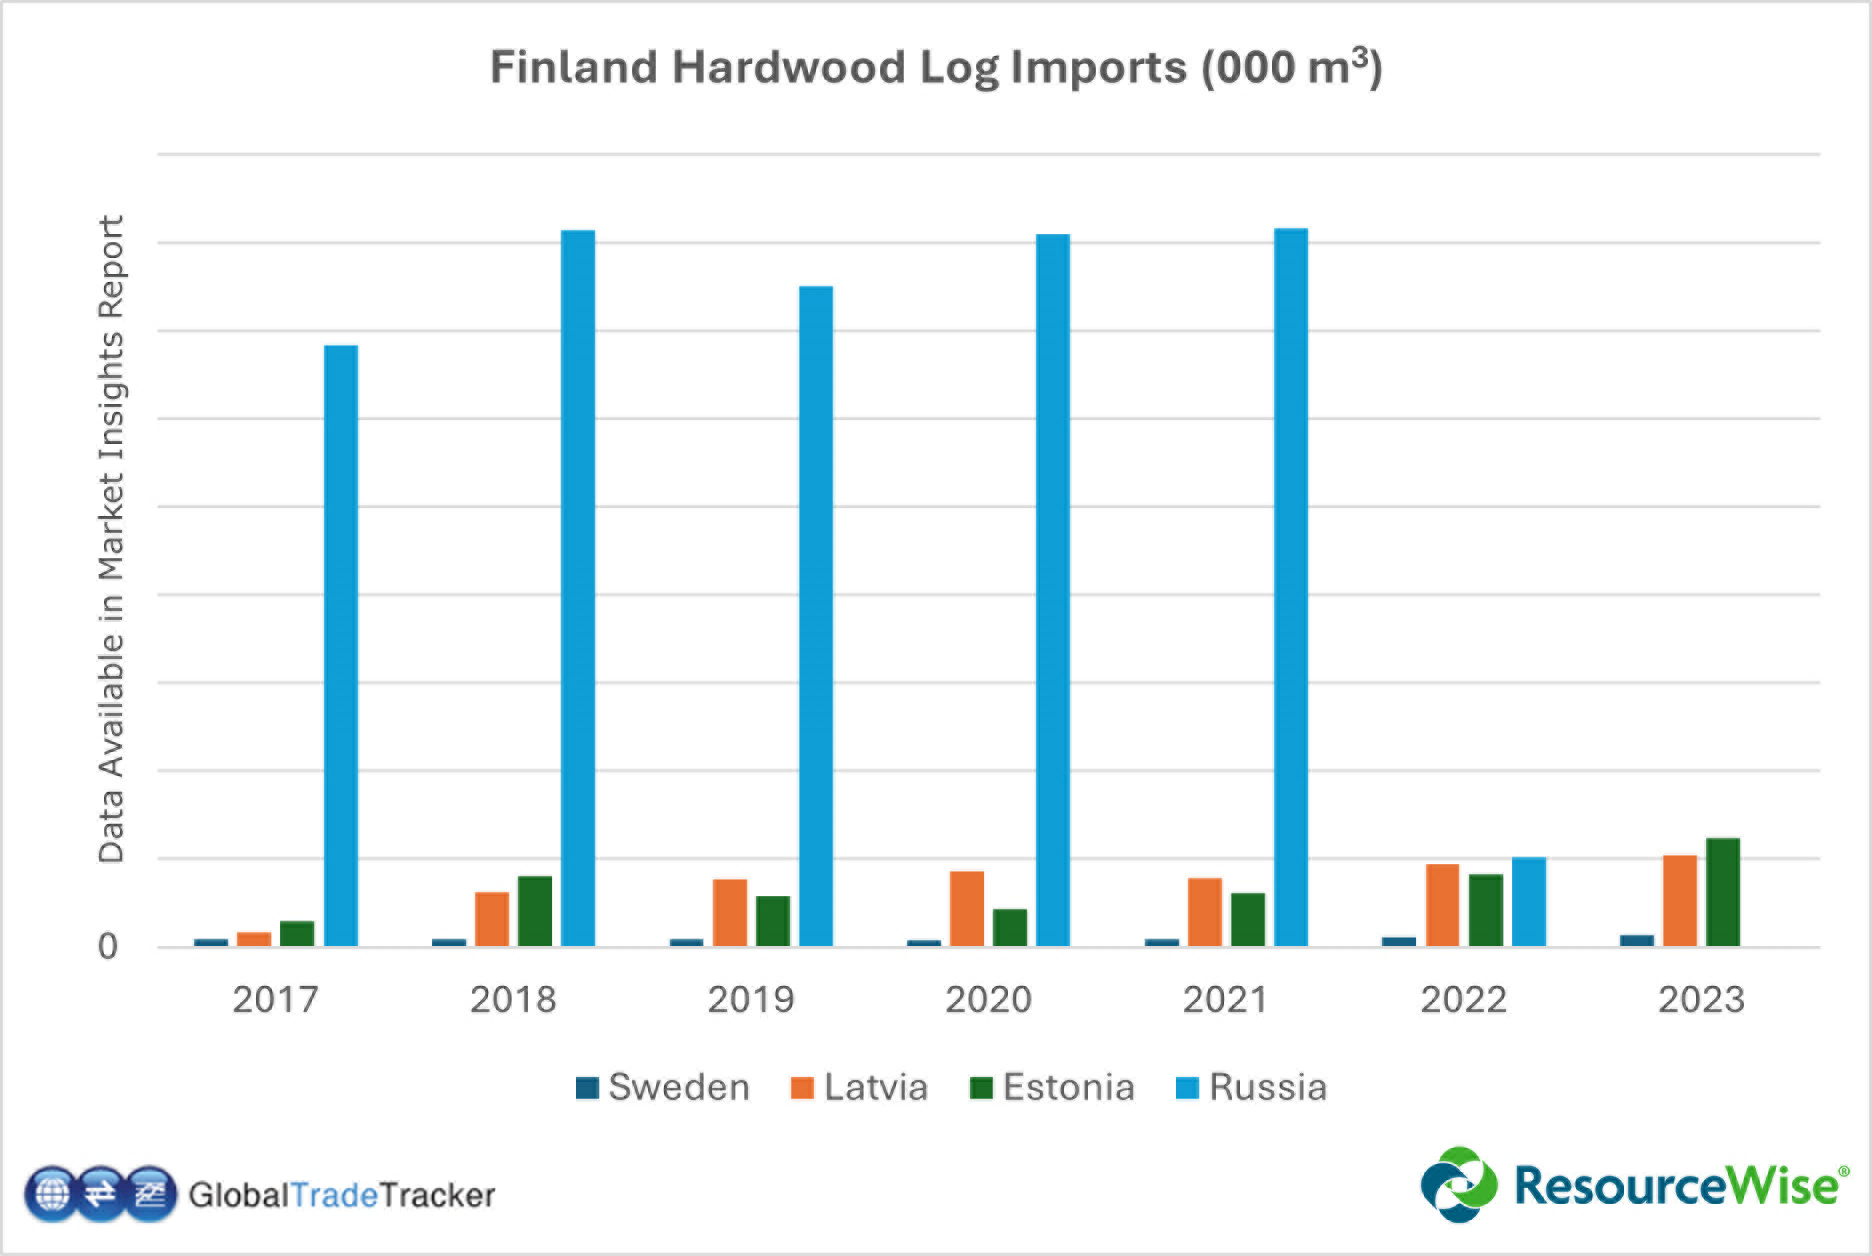 An Overview of Finland's Hardwood Log Imports